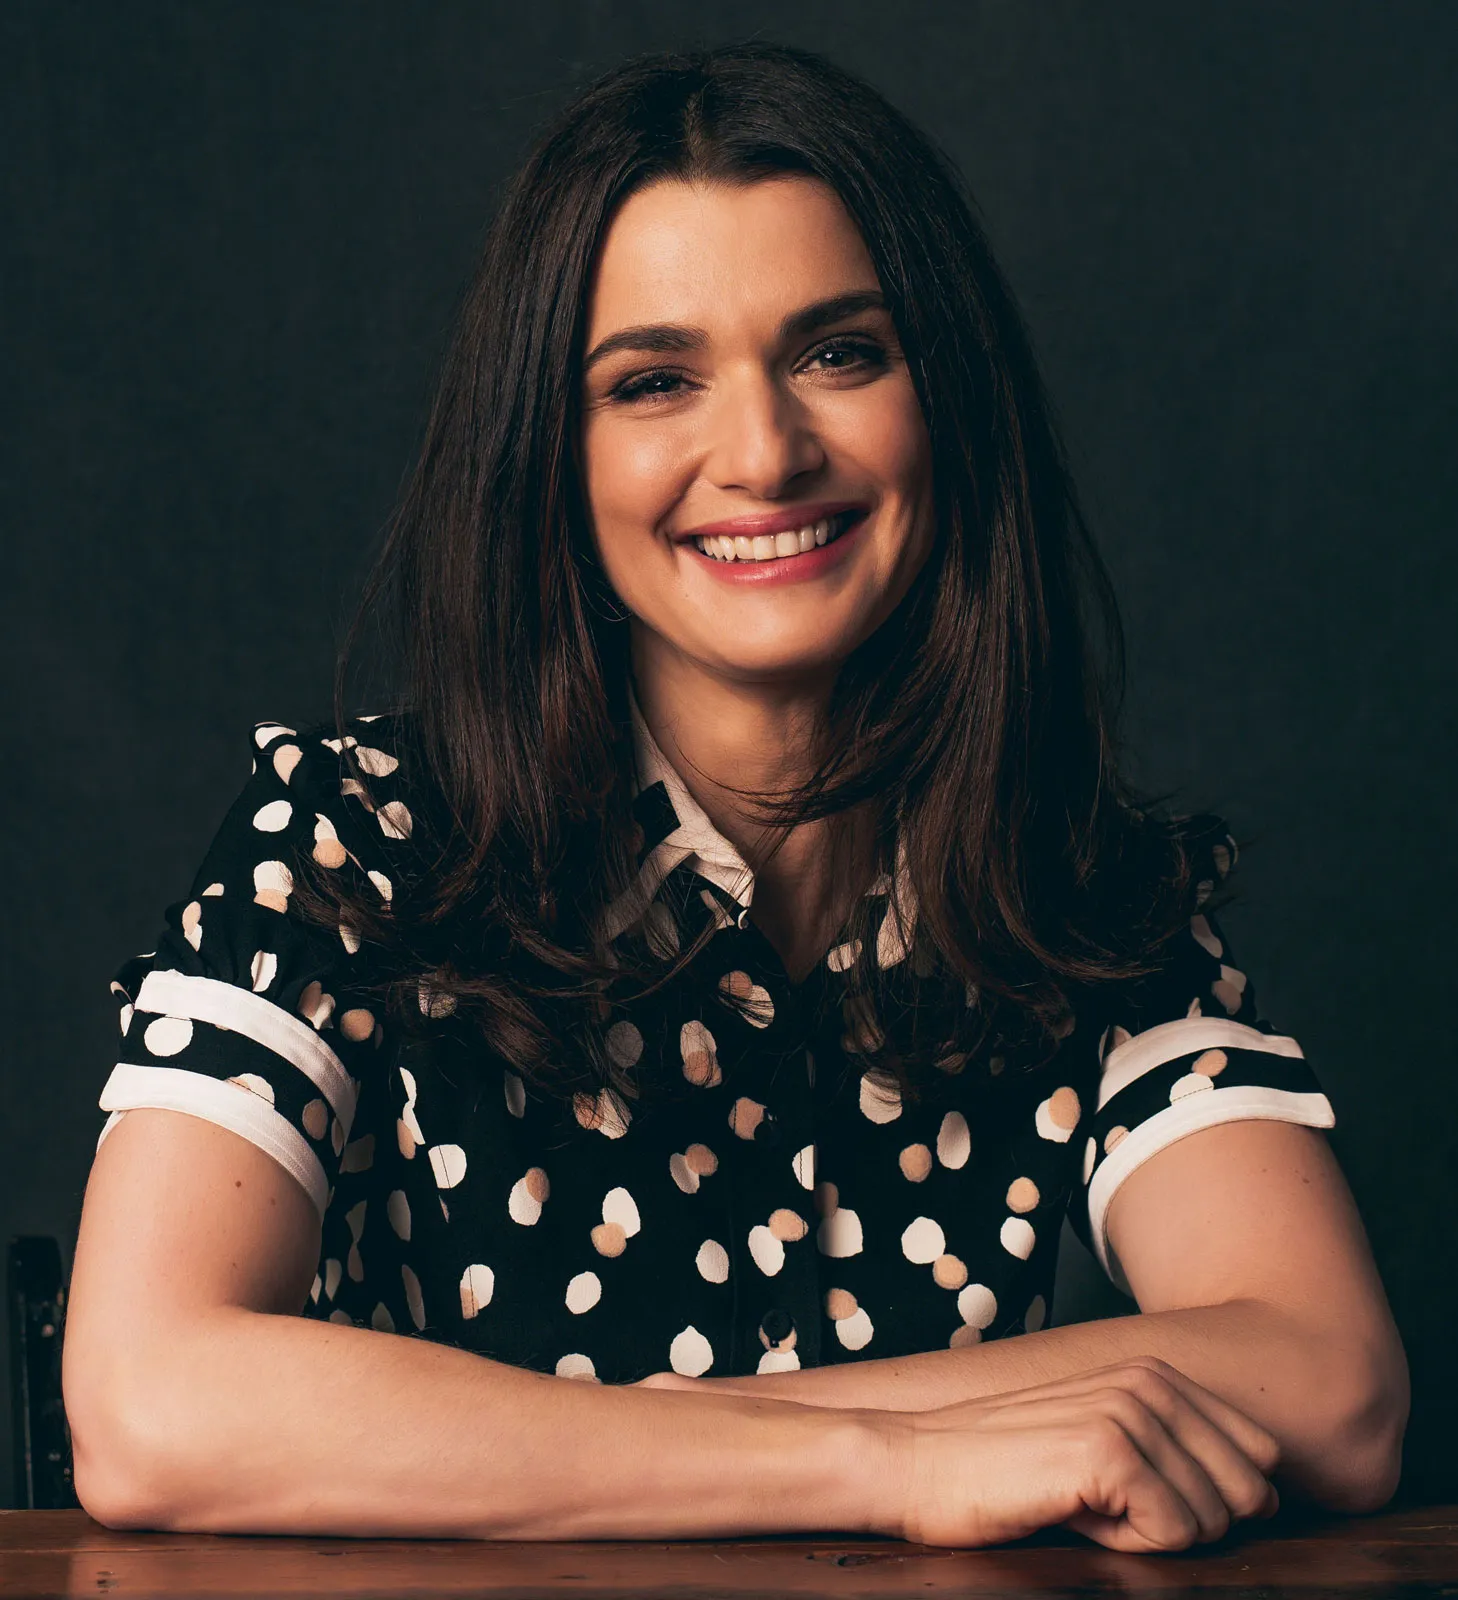 30 Interesting Things Most People Don’t Know About Rachel Weisz